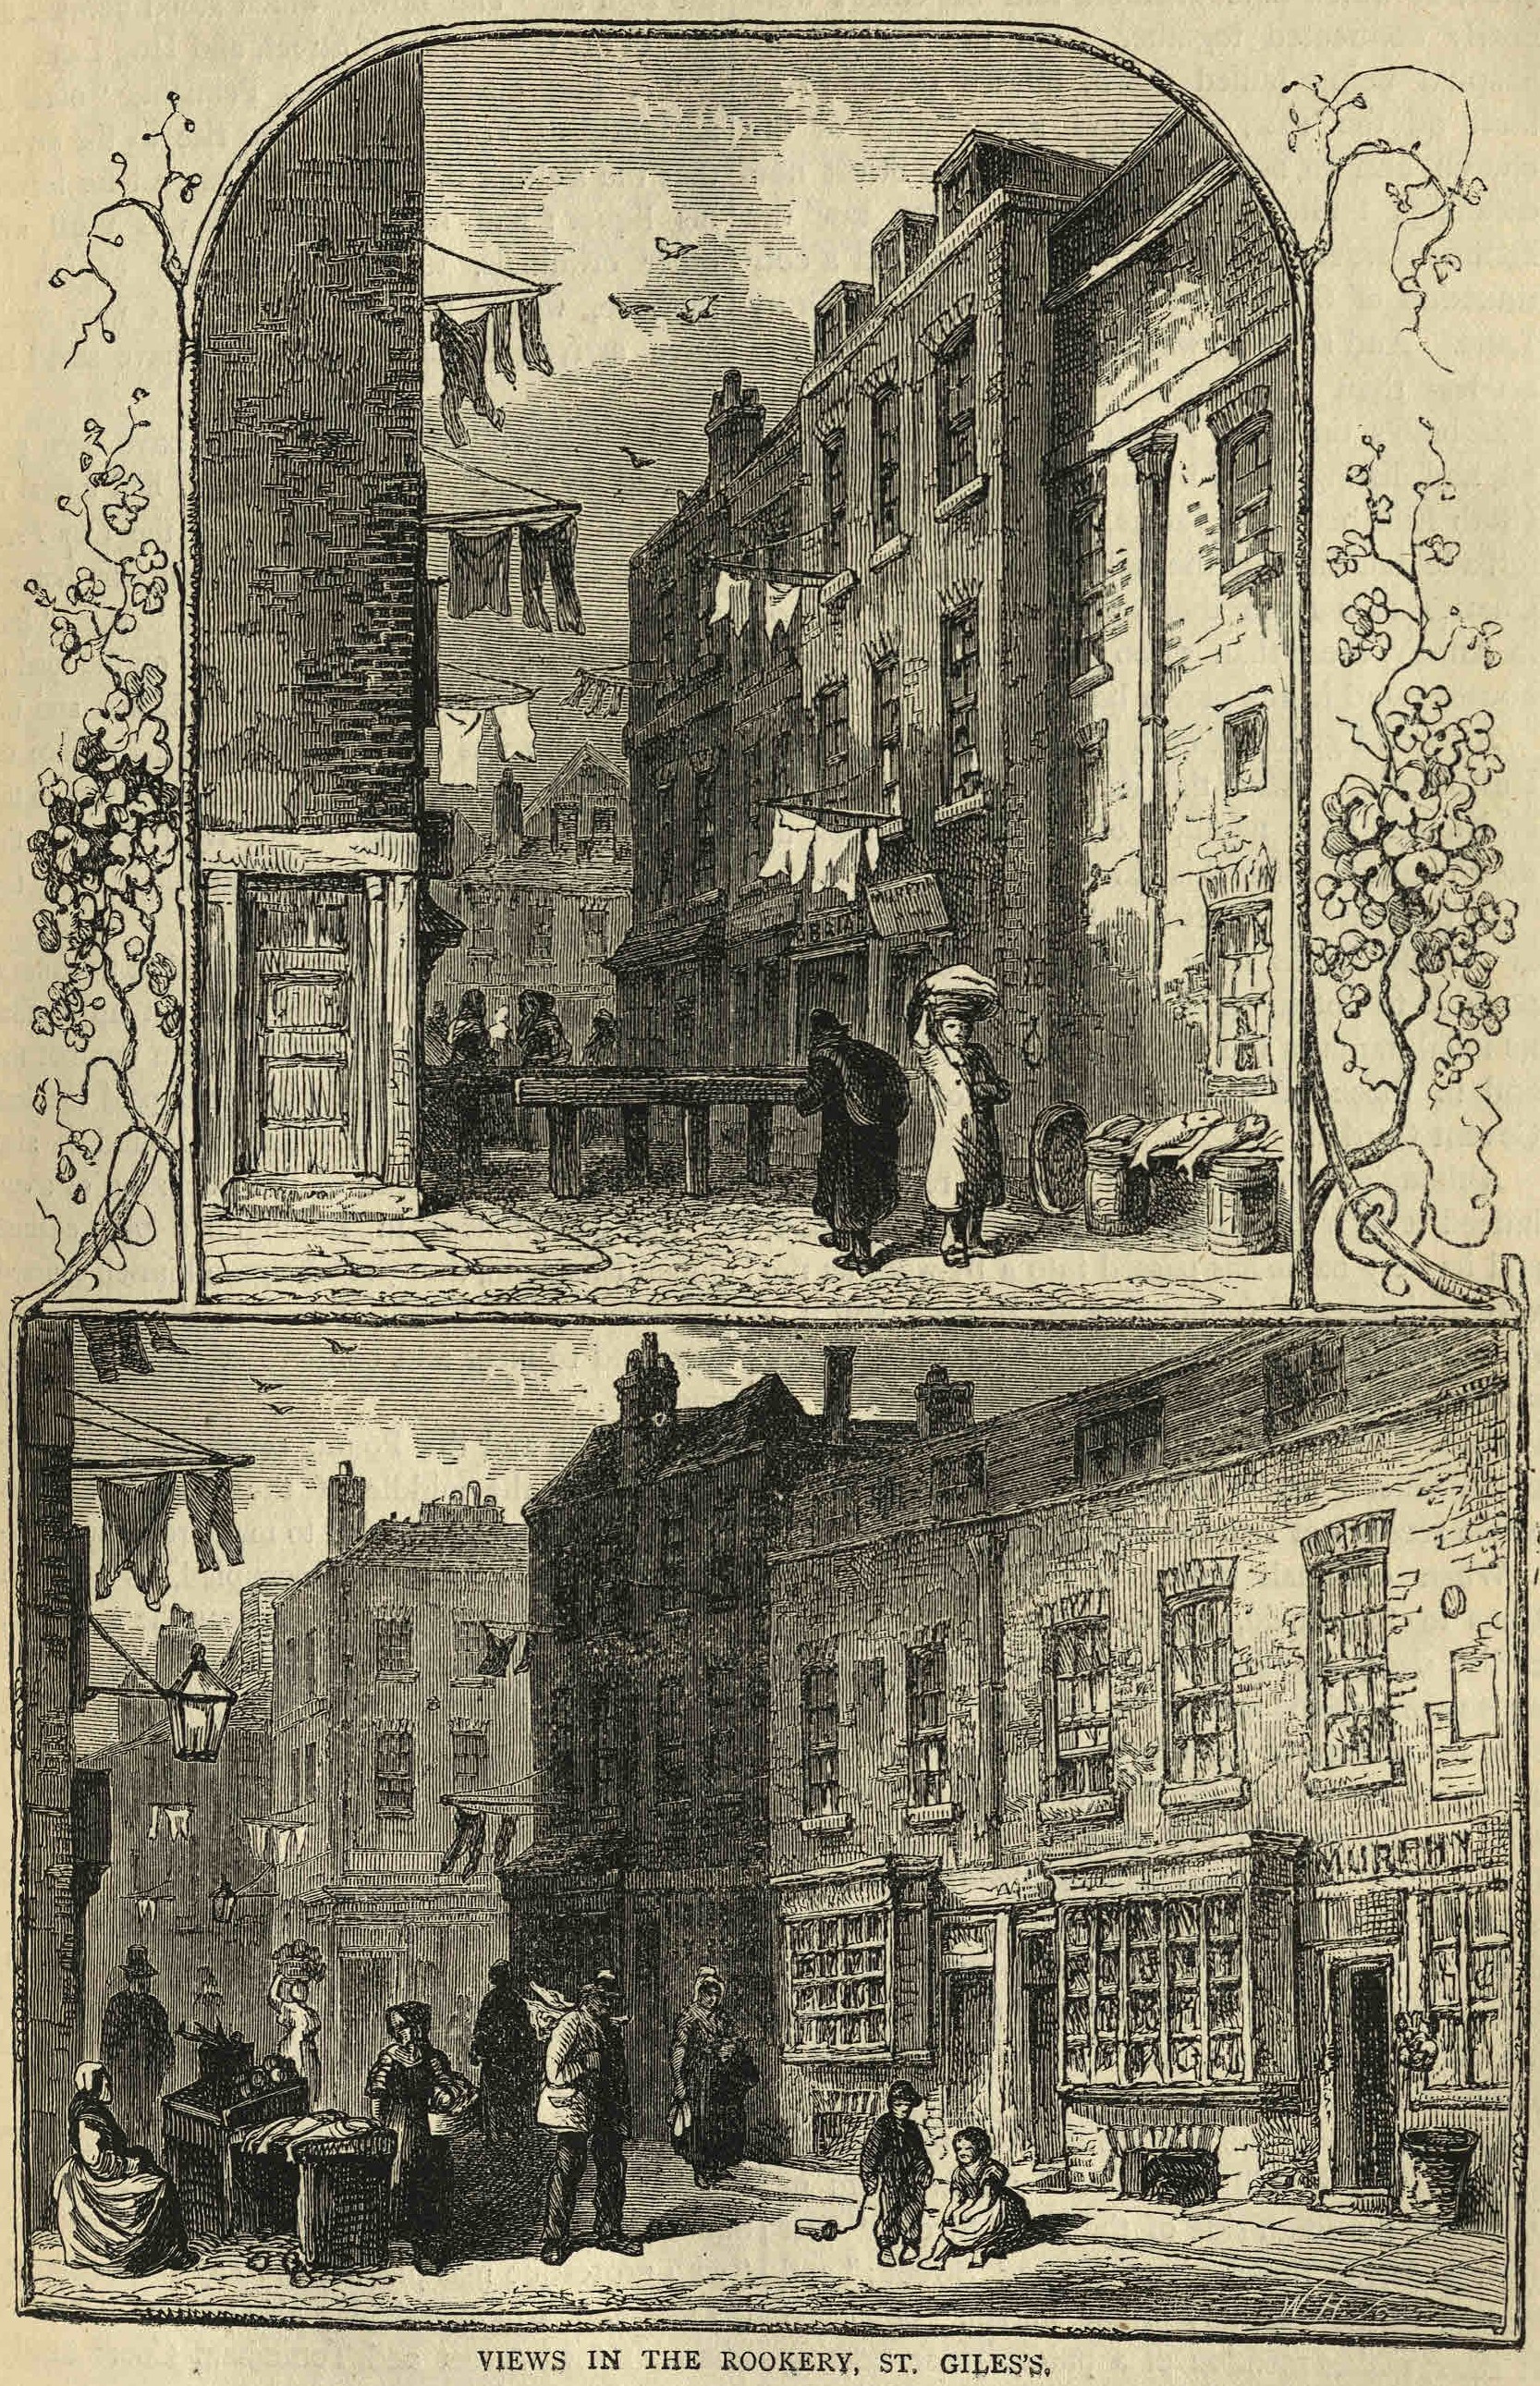 Views in the Rookery, St Giles, from 'Old and New London', vol.3, [1878?]